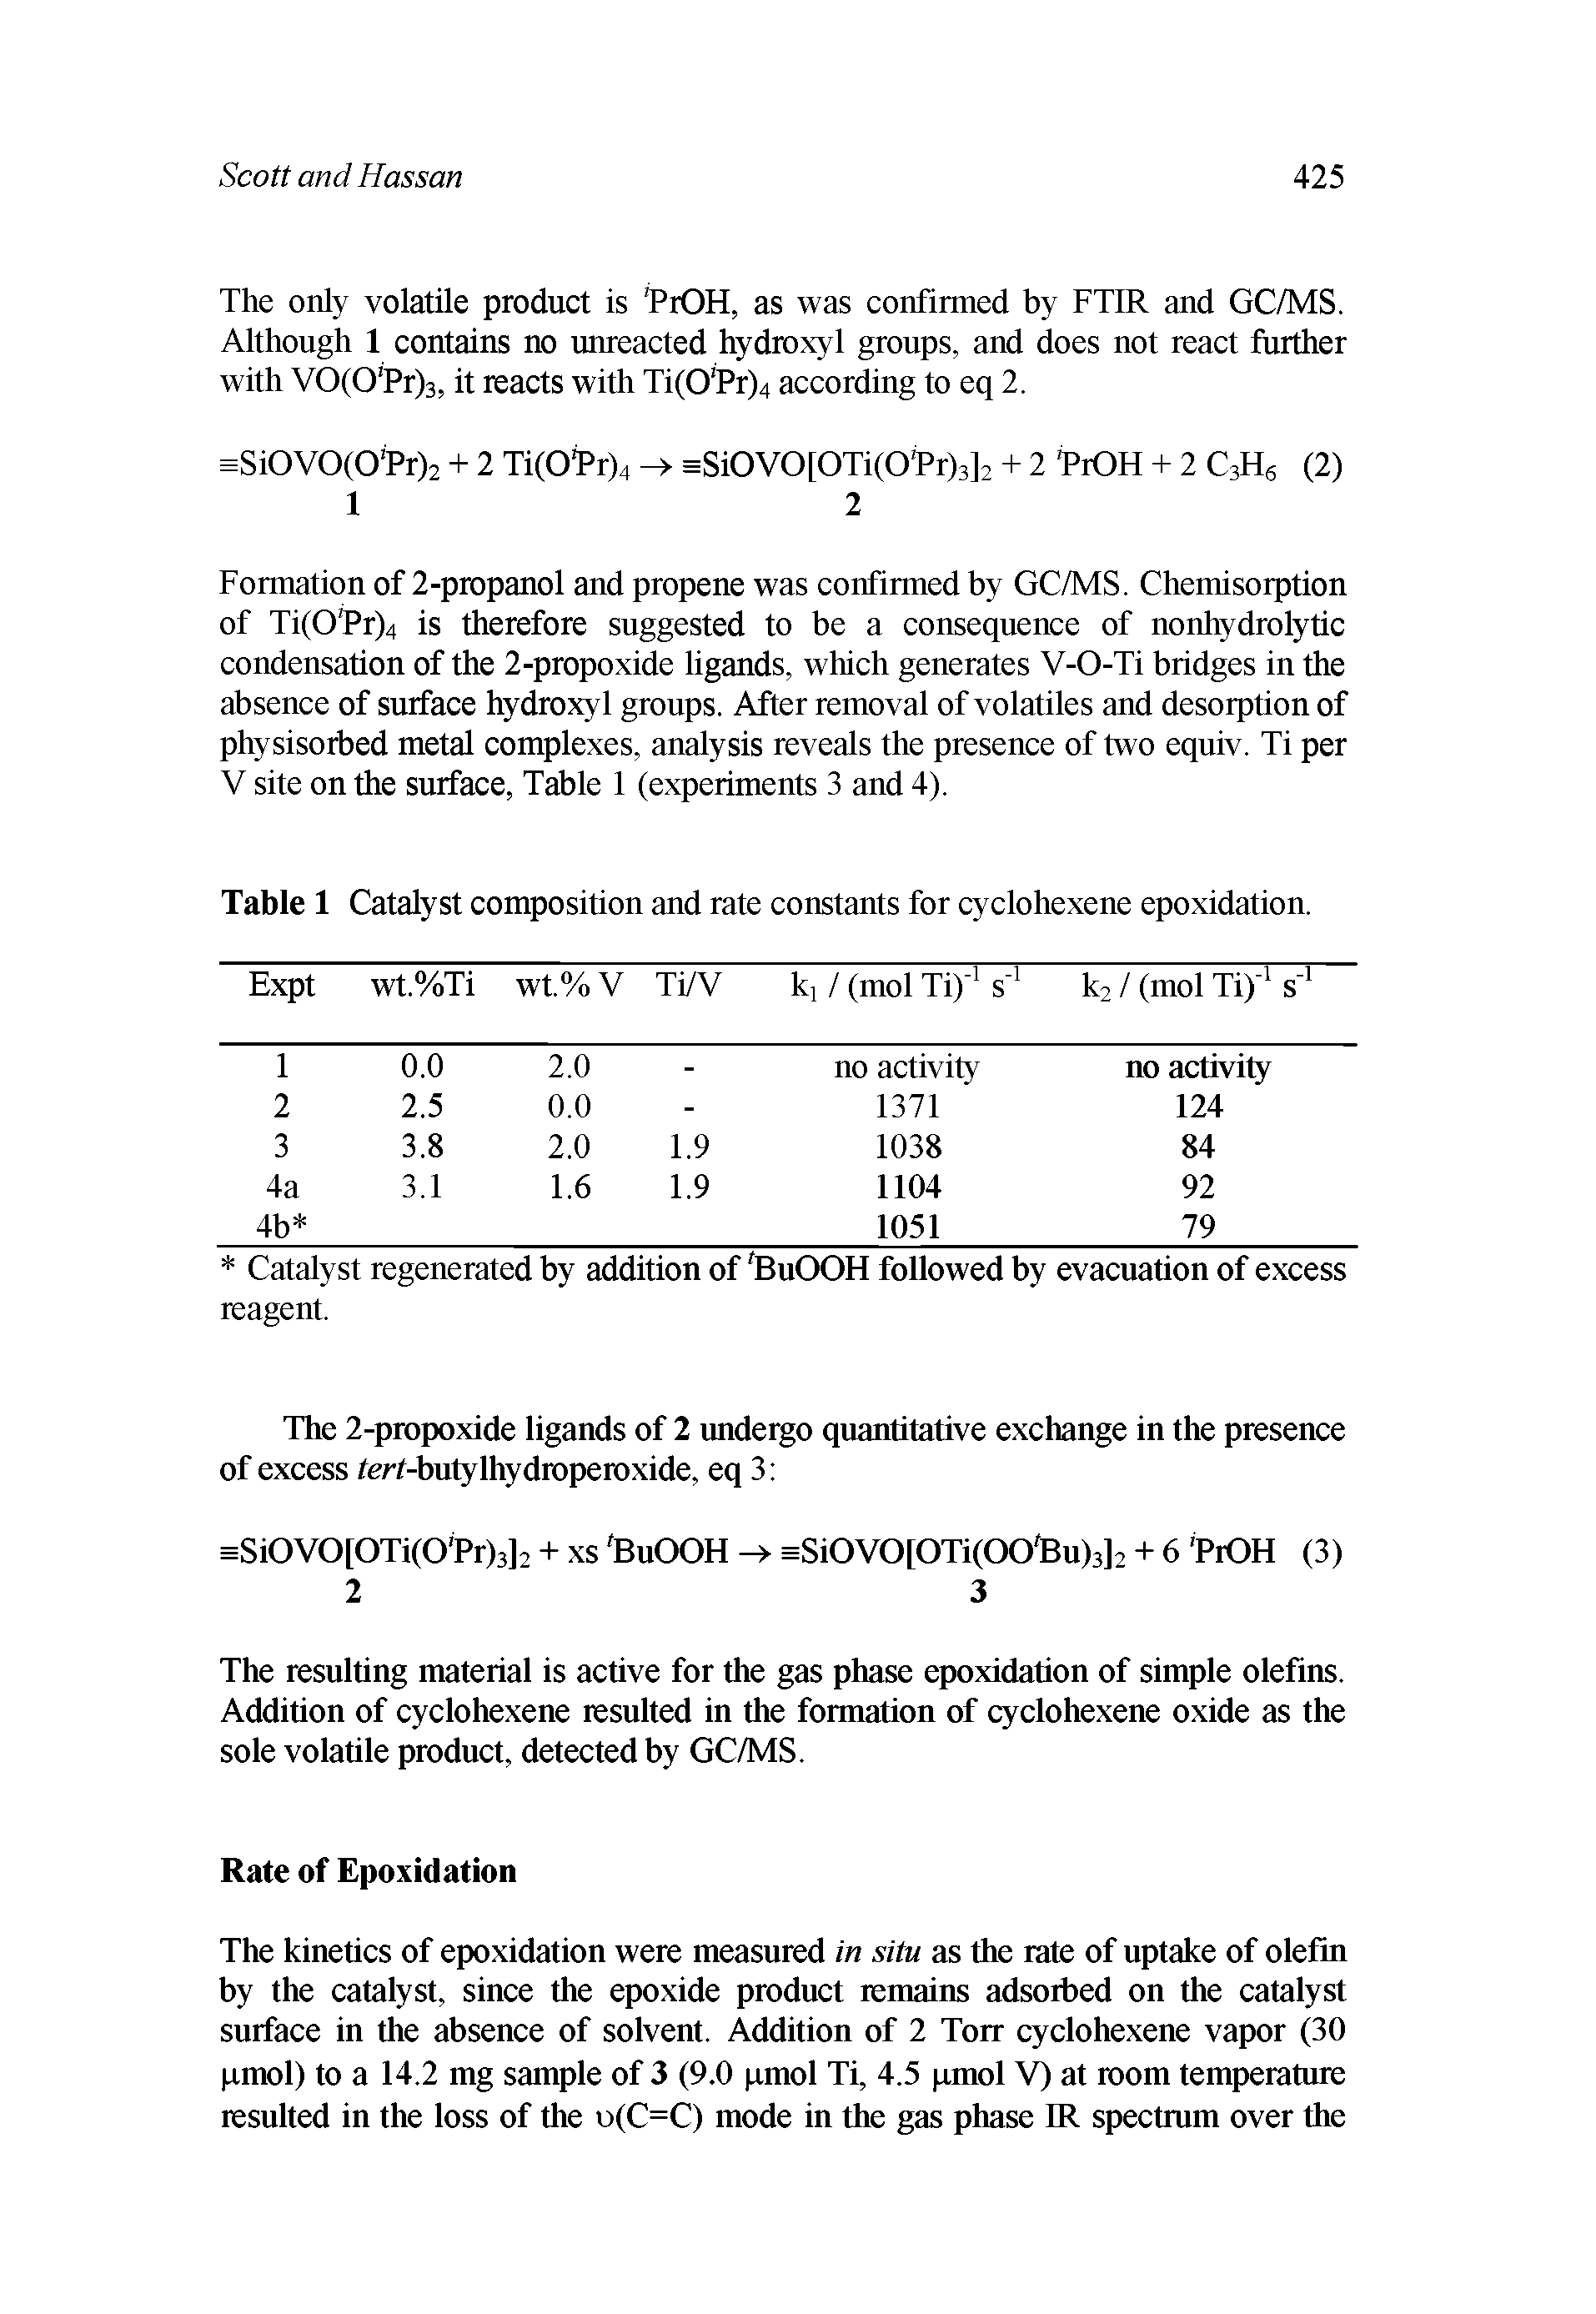 Table 1 Catalyst composition and rate constants for cyclohexene epoxidation.